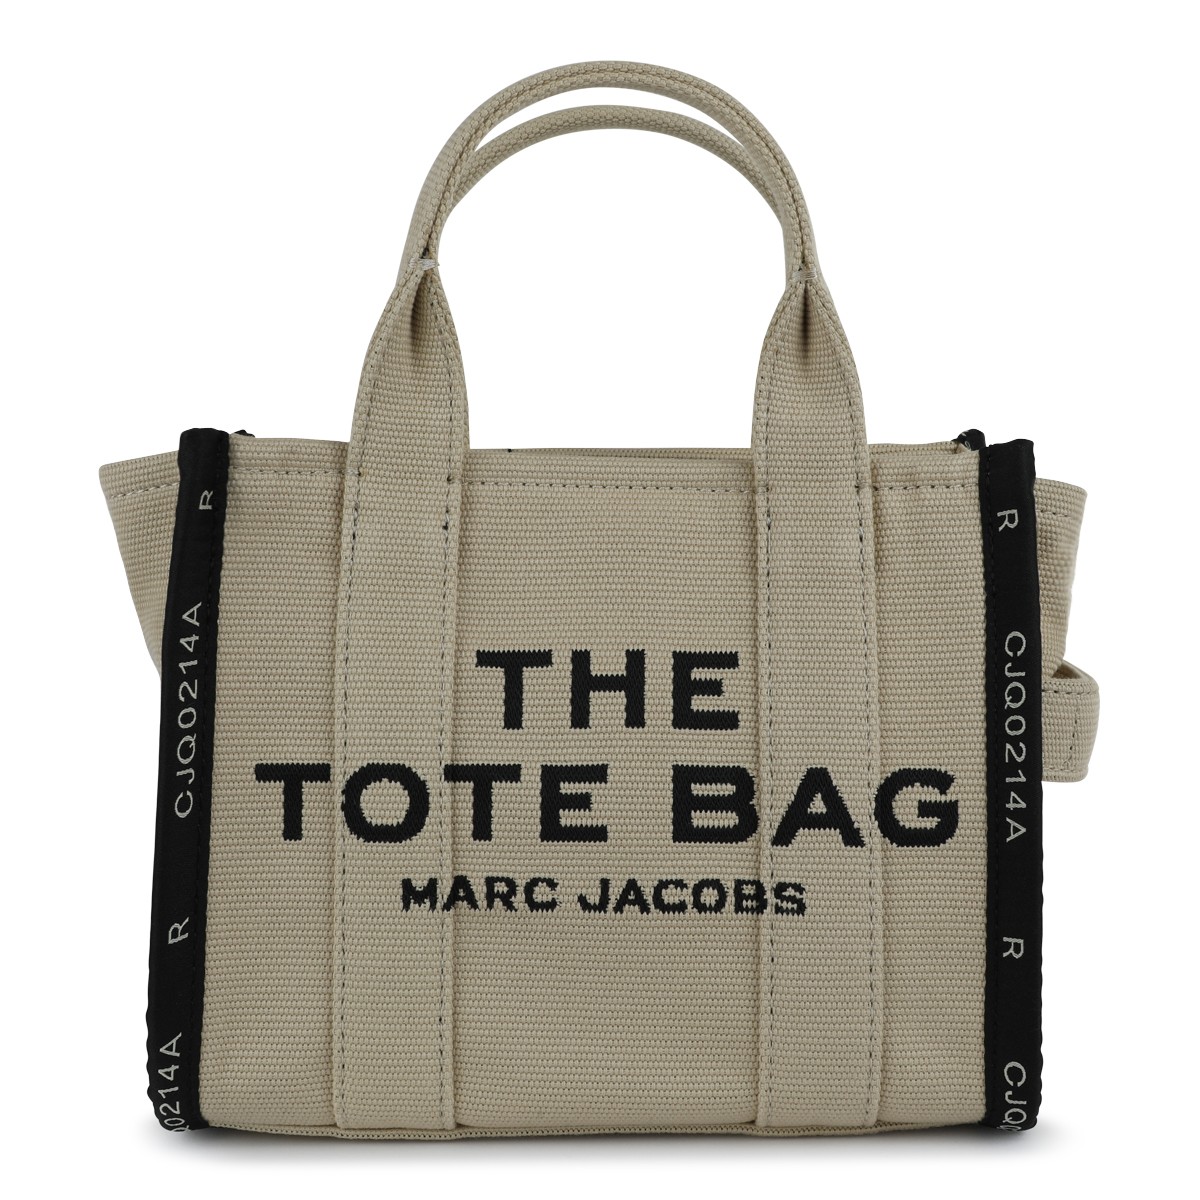 BEIGE AND BLACK CANVAS TOTE BAG